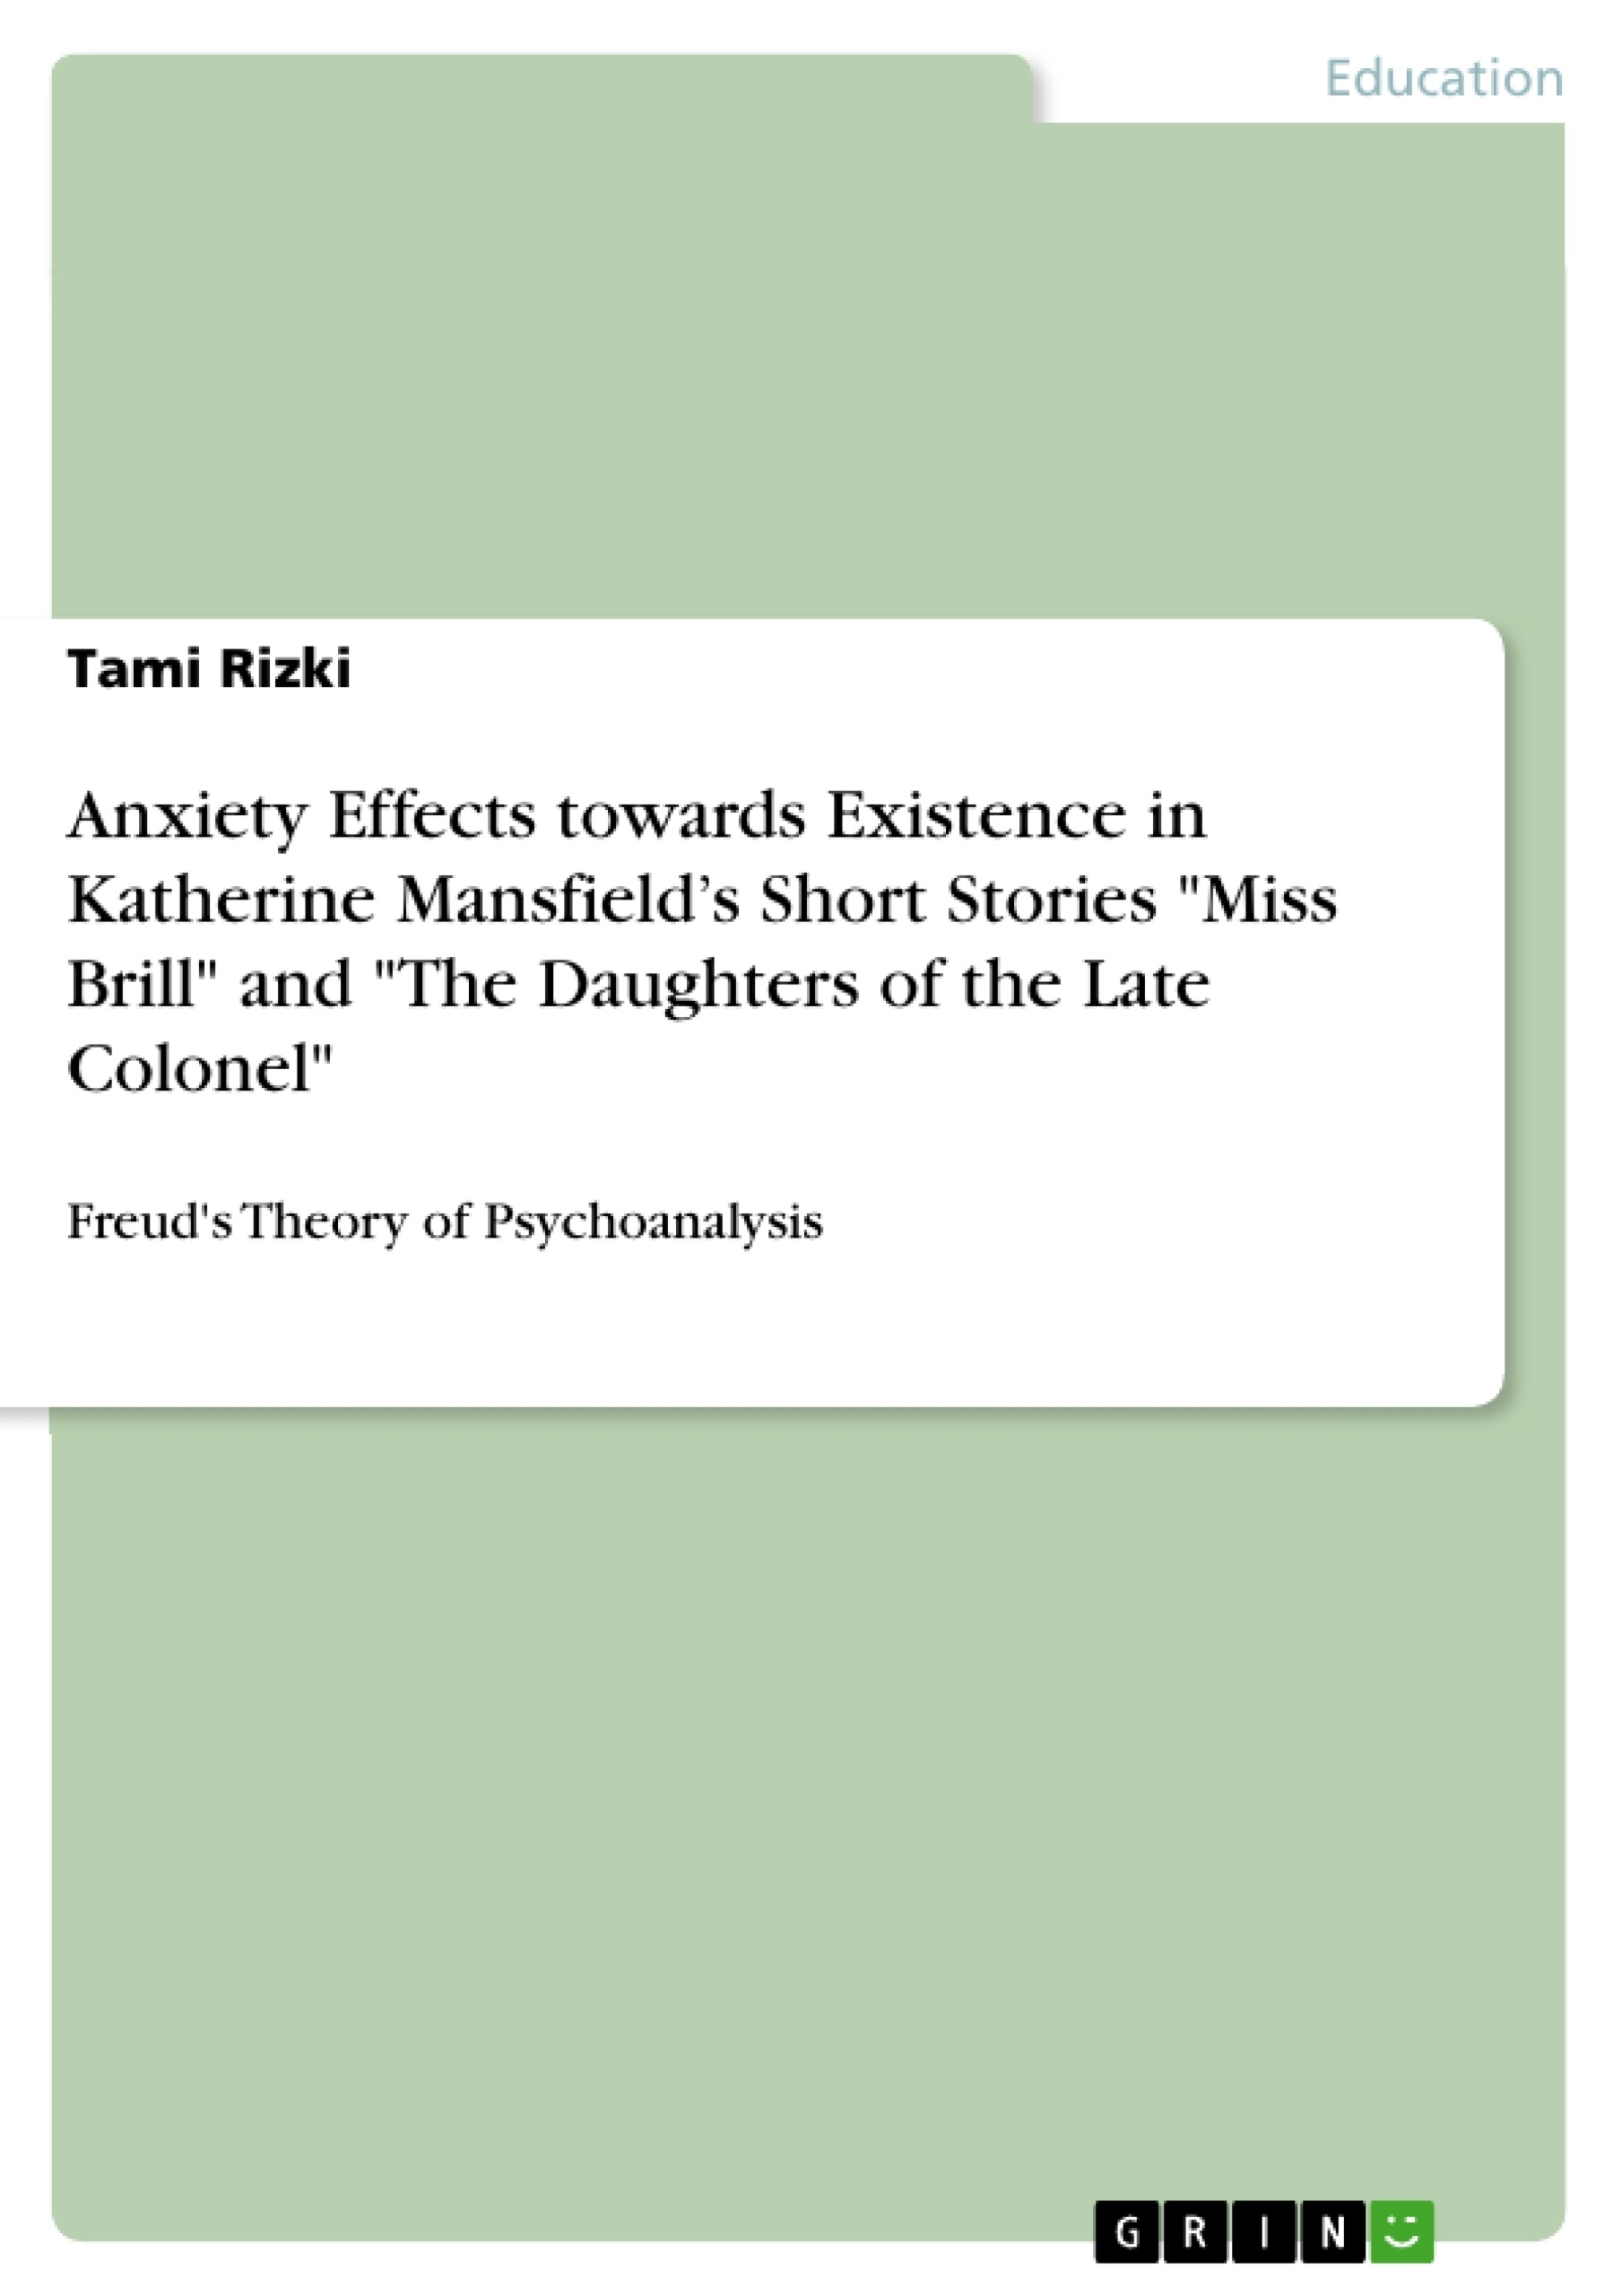 Title: Anxiety Effects towards Existence in Katherine Mansfield’s Short Stories "Miss Brill" and "The Daughters of the Late Colonel"